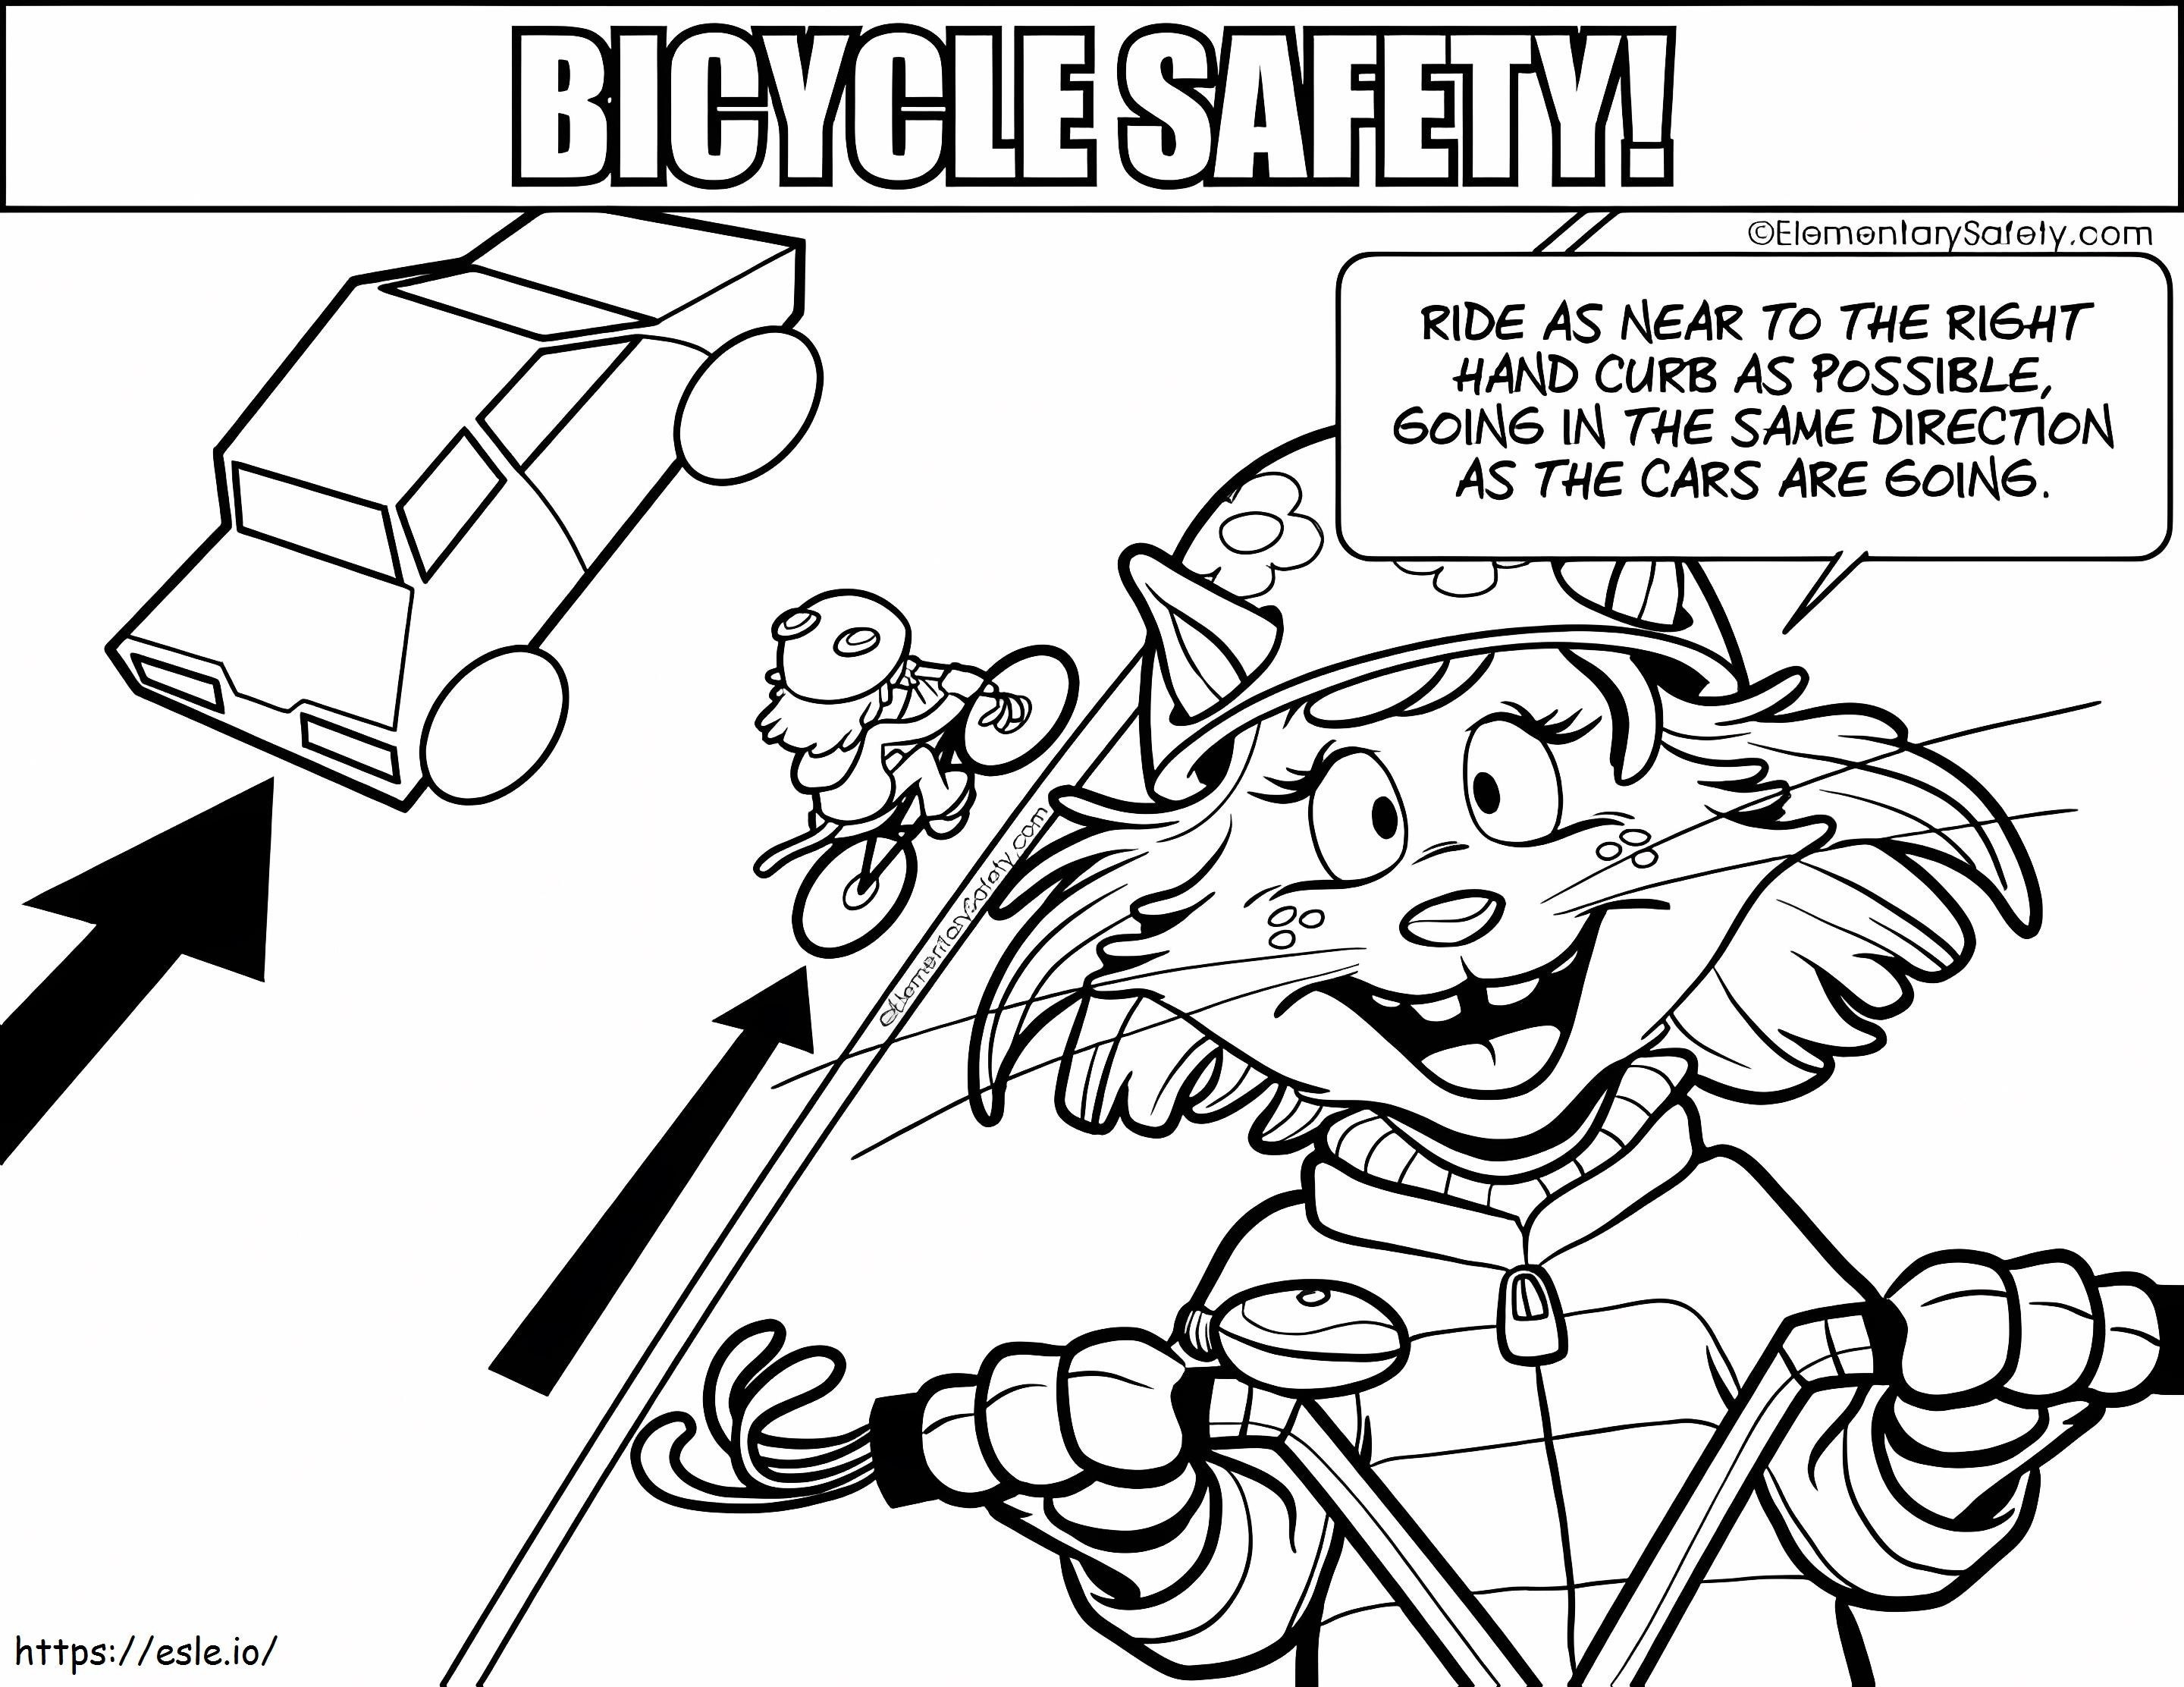 Near The Curb Bicycle Safety coloring page